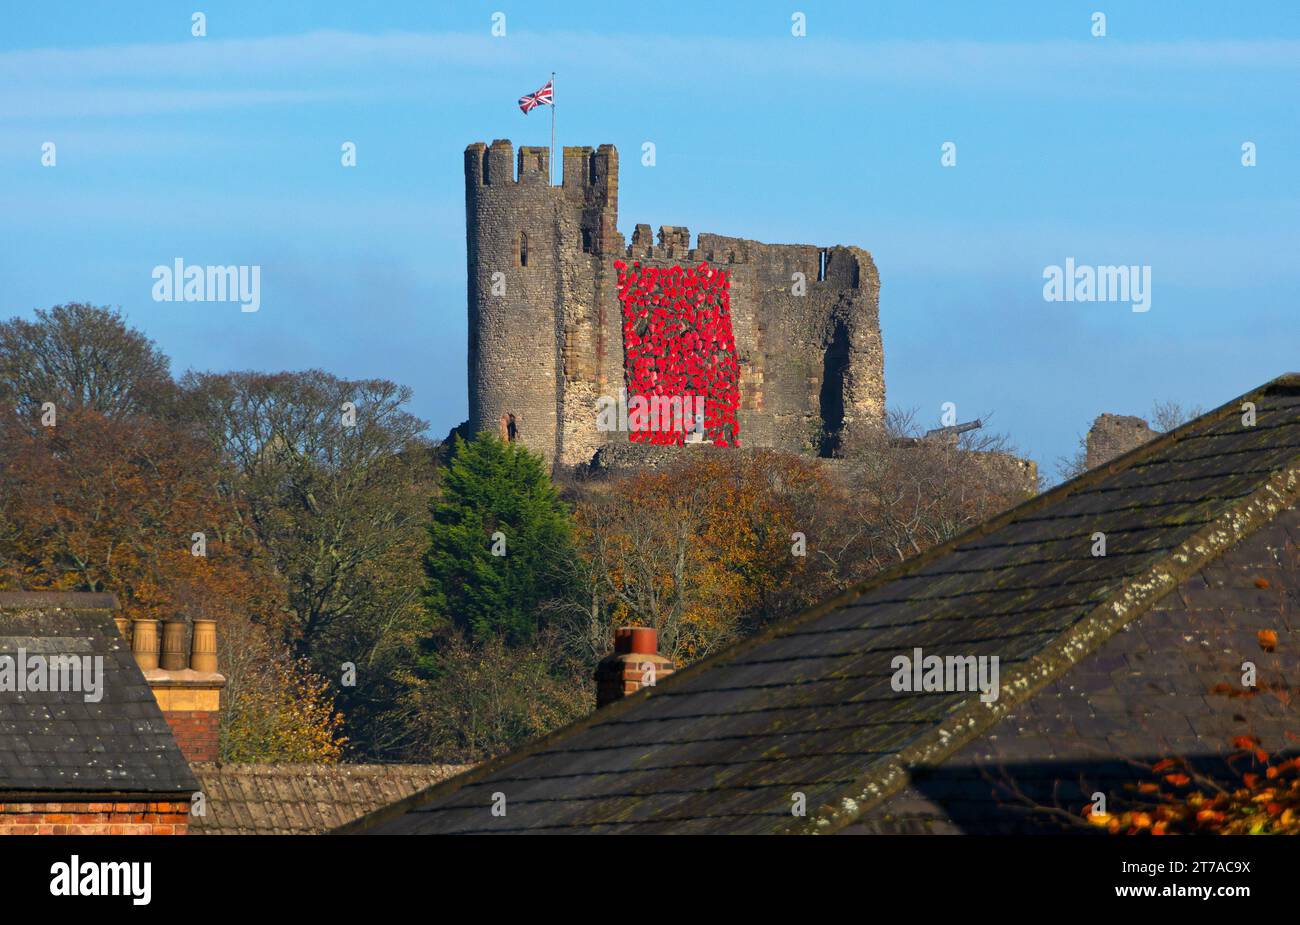 Red poppies cascade down Dudley Castle in special Remembrance Day display. Dudley, West Midlands, England, UK Stock Photo